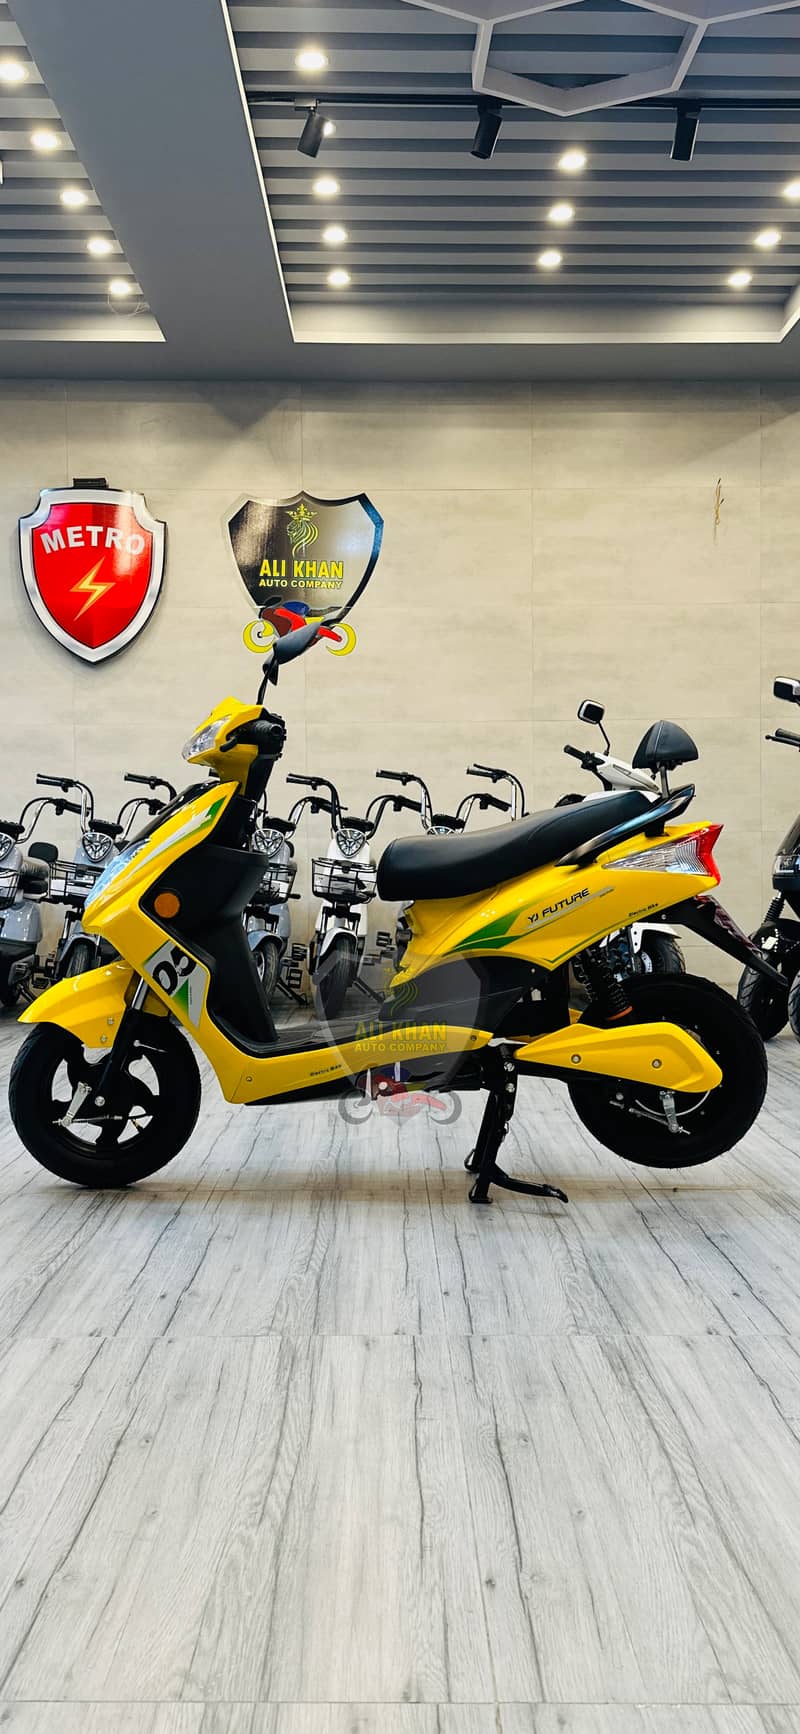 ALI LHAN AUTO COMPANY SCOOTY SCOOTER GIRLS LADIES BOYS MALE 6